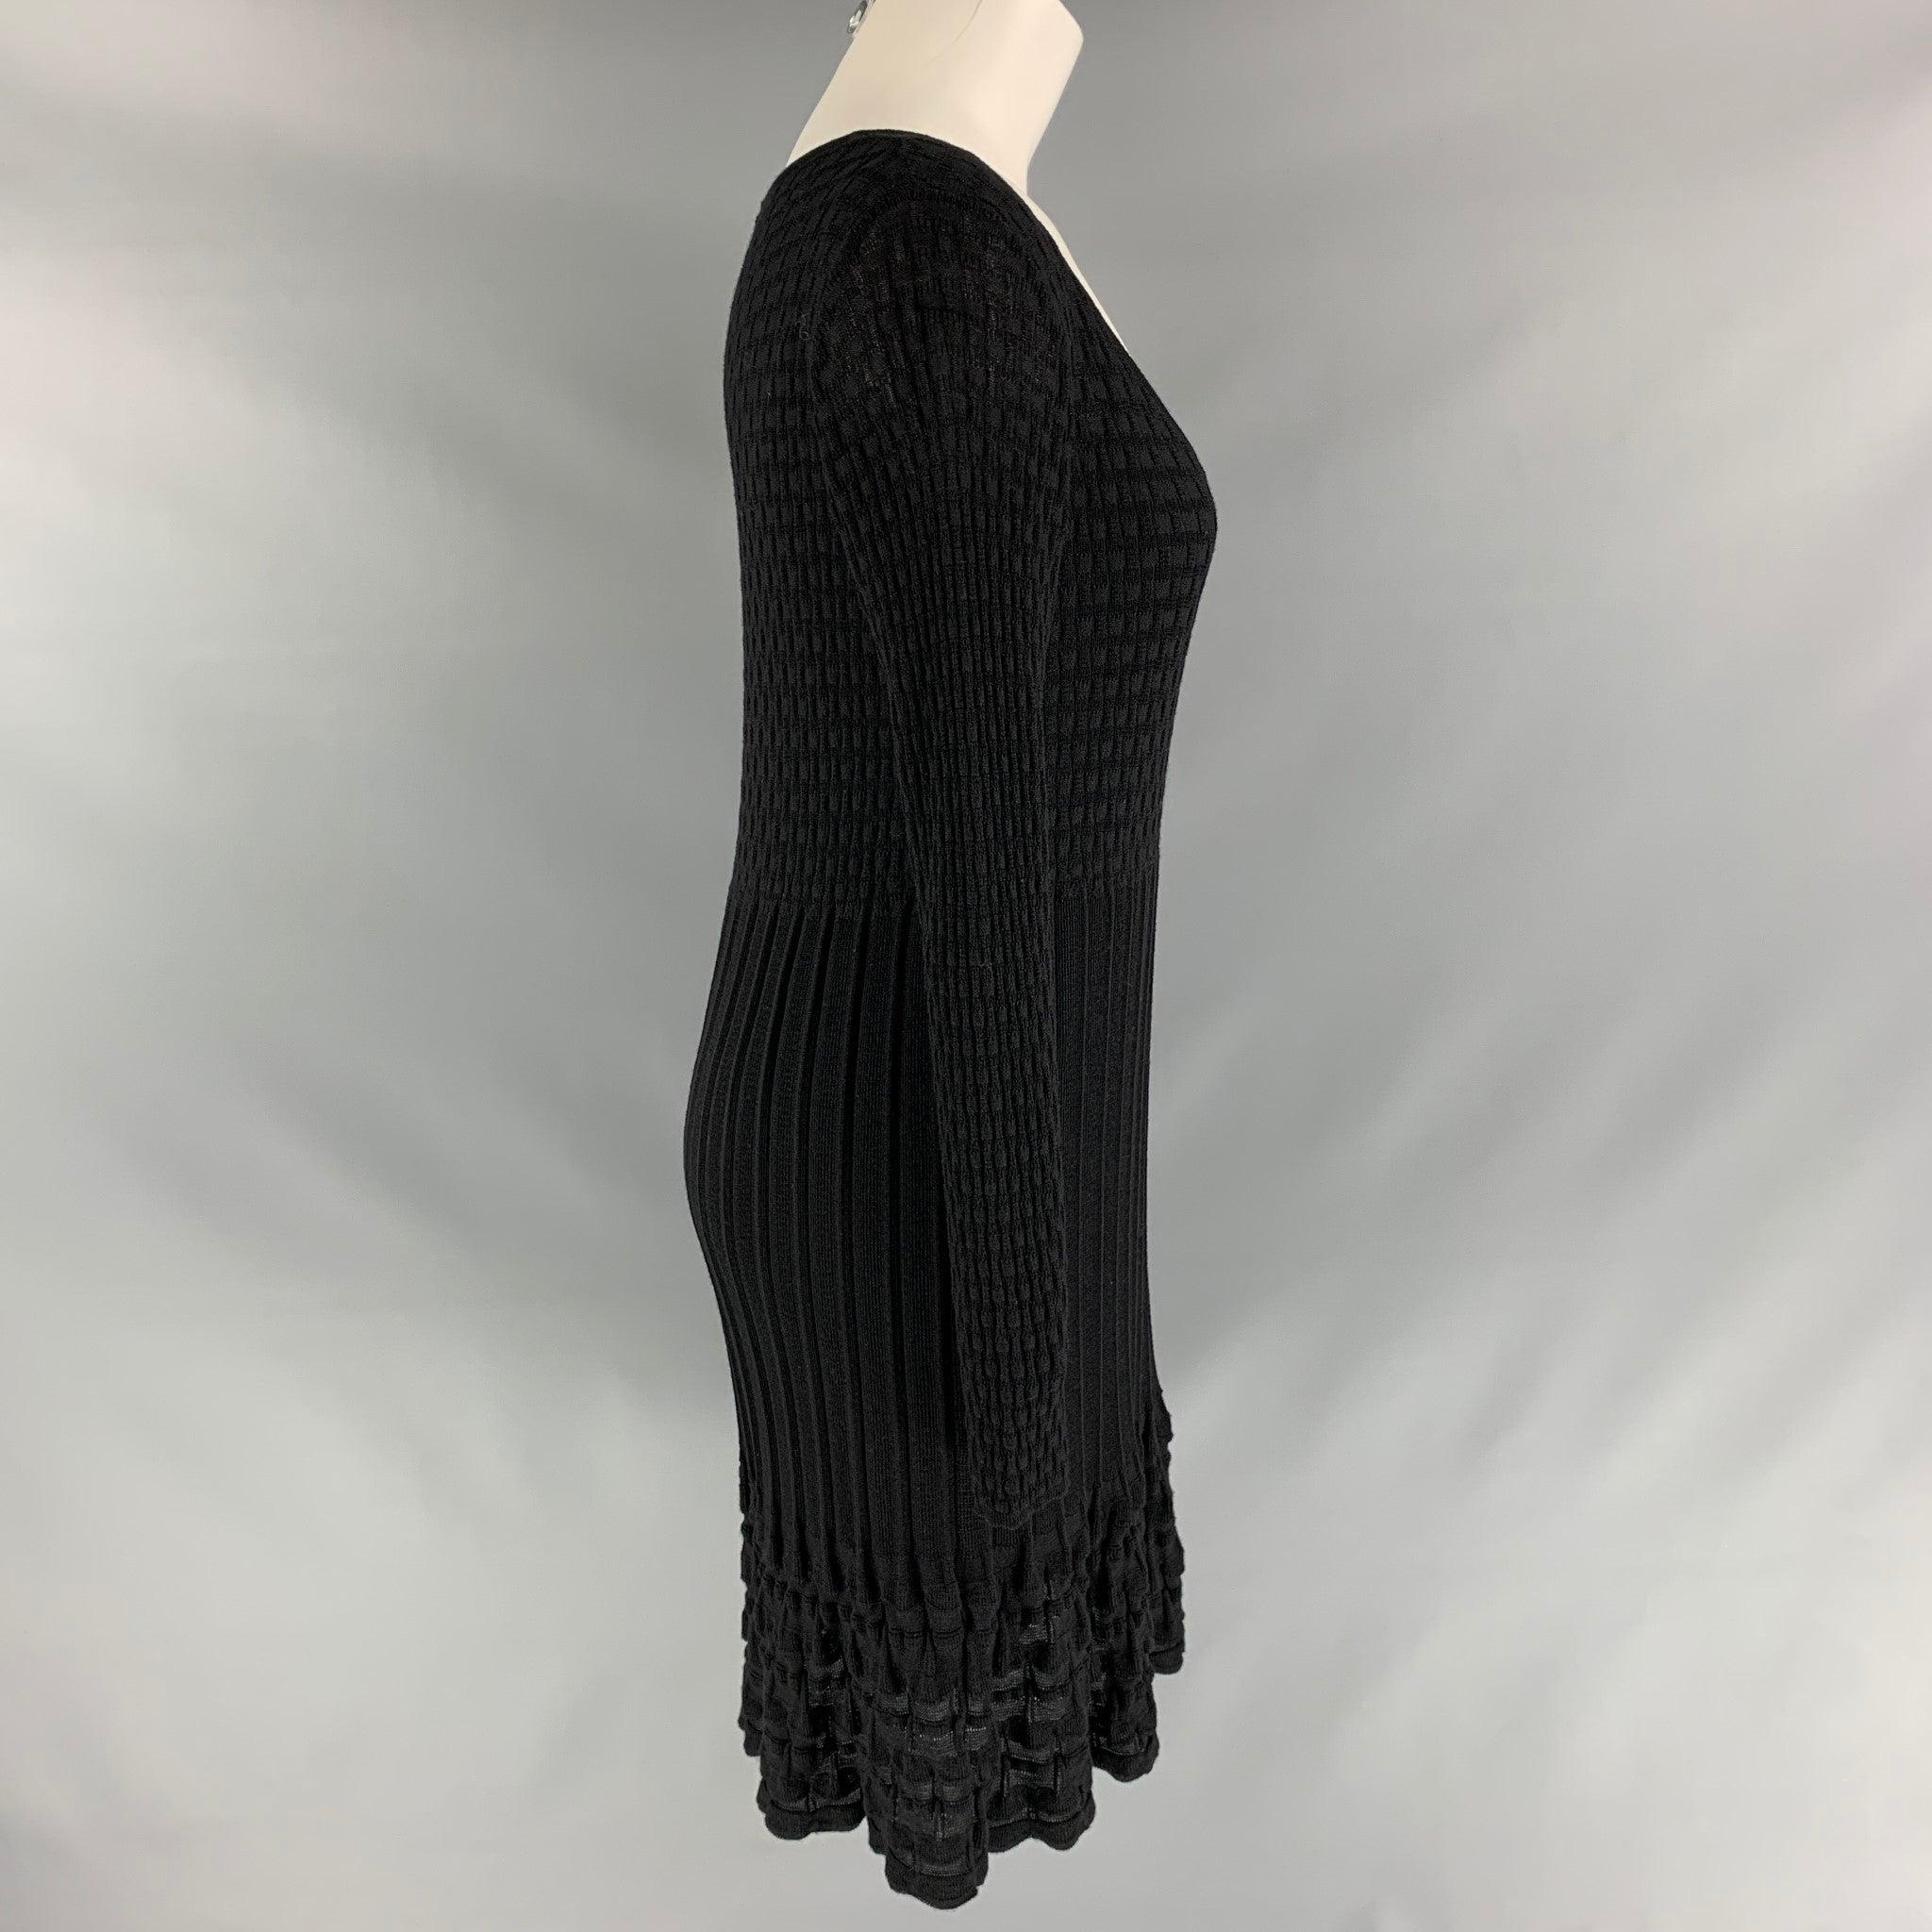 M MISSONI long sleeve A-line dress comes in black knitted wool fabric and removable slip lining. Very Good Pre-Owned Condition. Fabric Tag Removed. 

Marked:   40  

Measurements: 
 
Shoulder: 17 inBust: 33 inWaist: 33 inHip: 36 inSleeve: 26